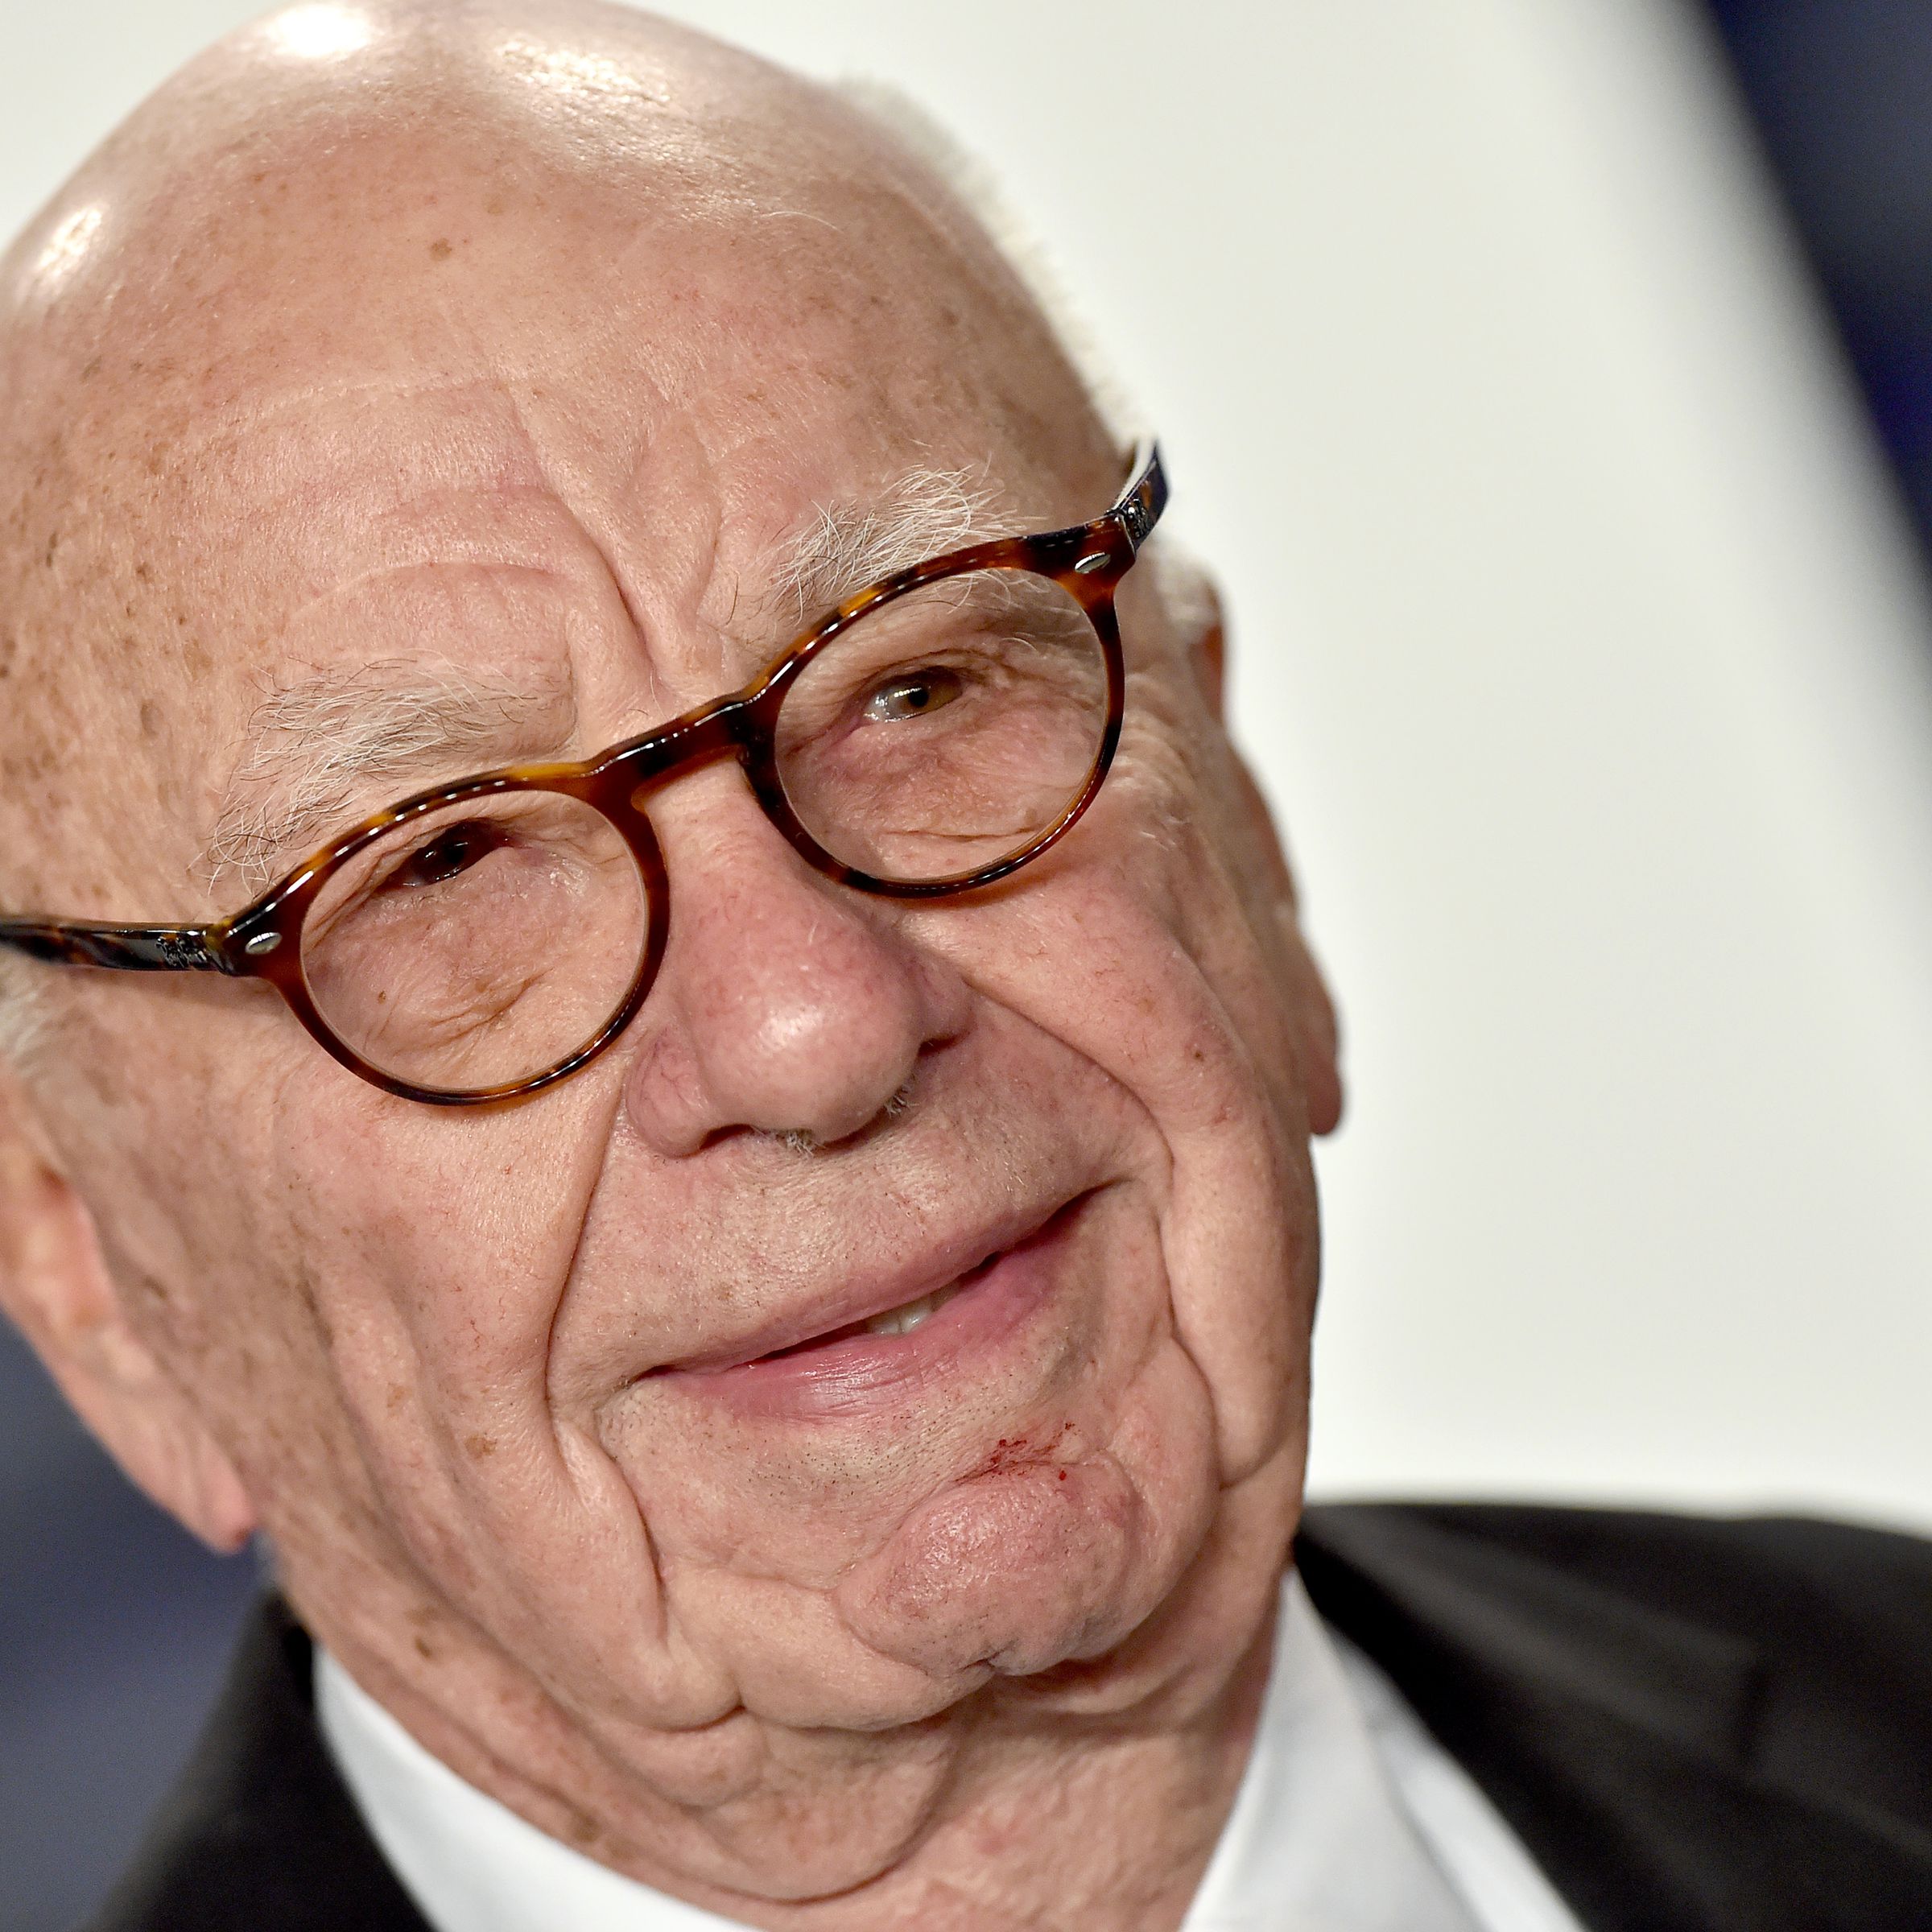 Rupert Murdoch attends the 2019 Vanity Fair Oscar Party Hosted By Radhika Jones at Wallis Annenberg Center for the Performing Arts on February 24, 2019 in Beverly Hills, California.